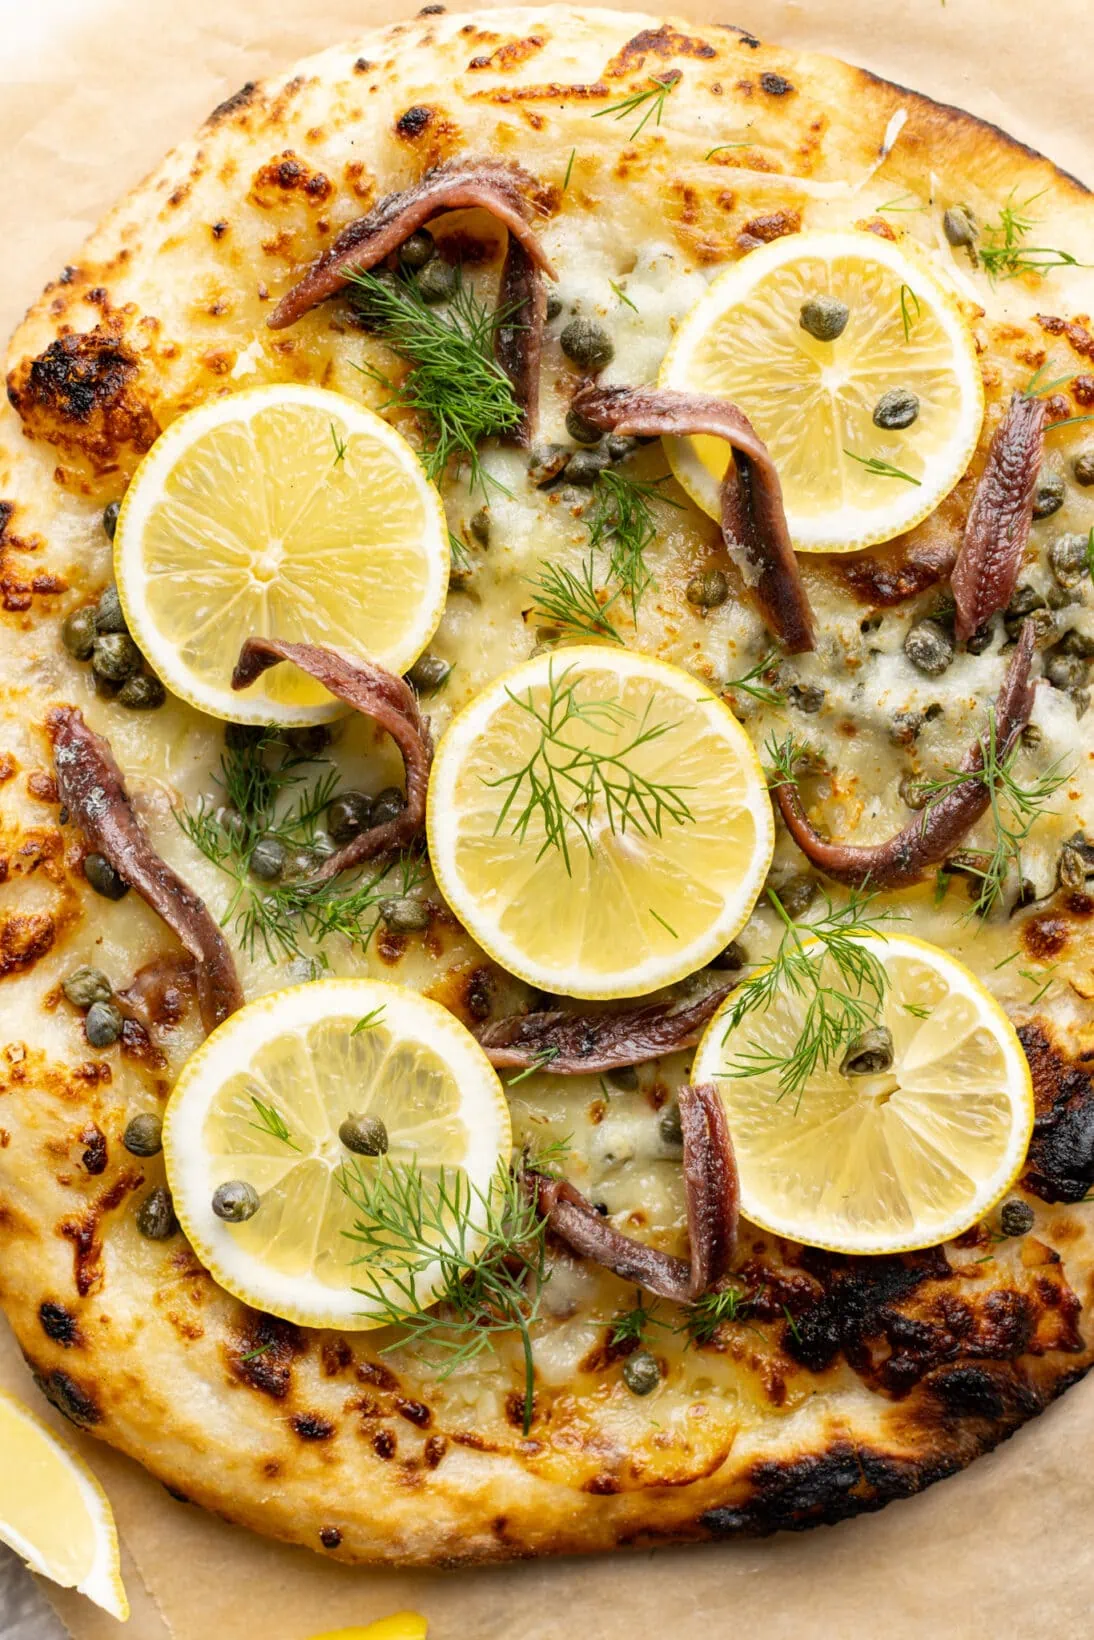 up close lemon anchovy pizza with mozzarella cheese, capers and slices of lemon.